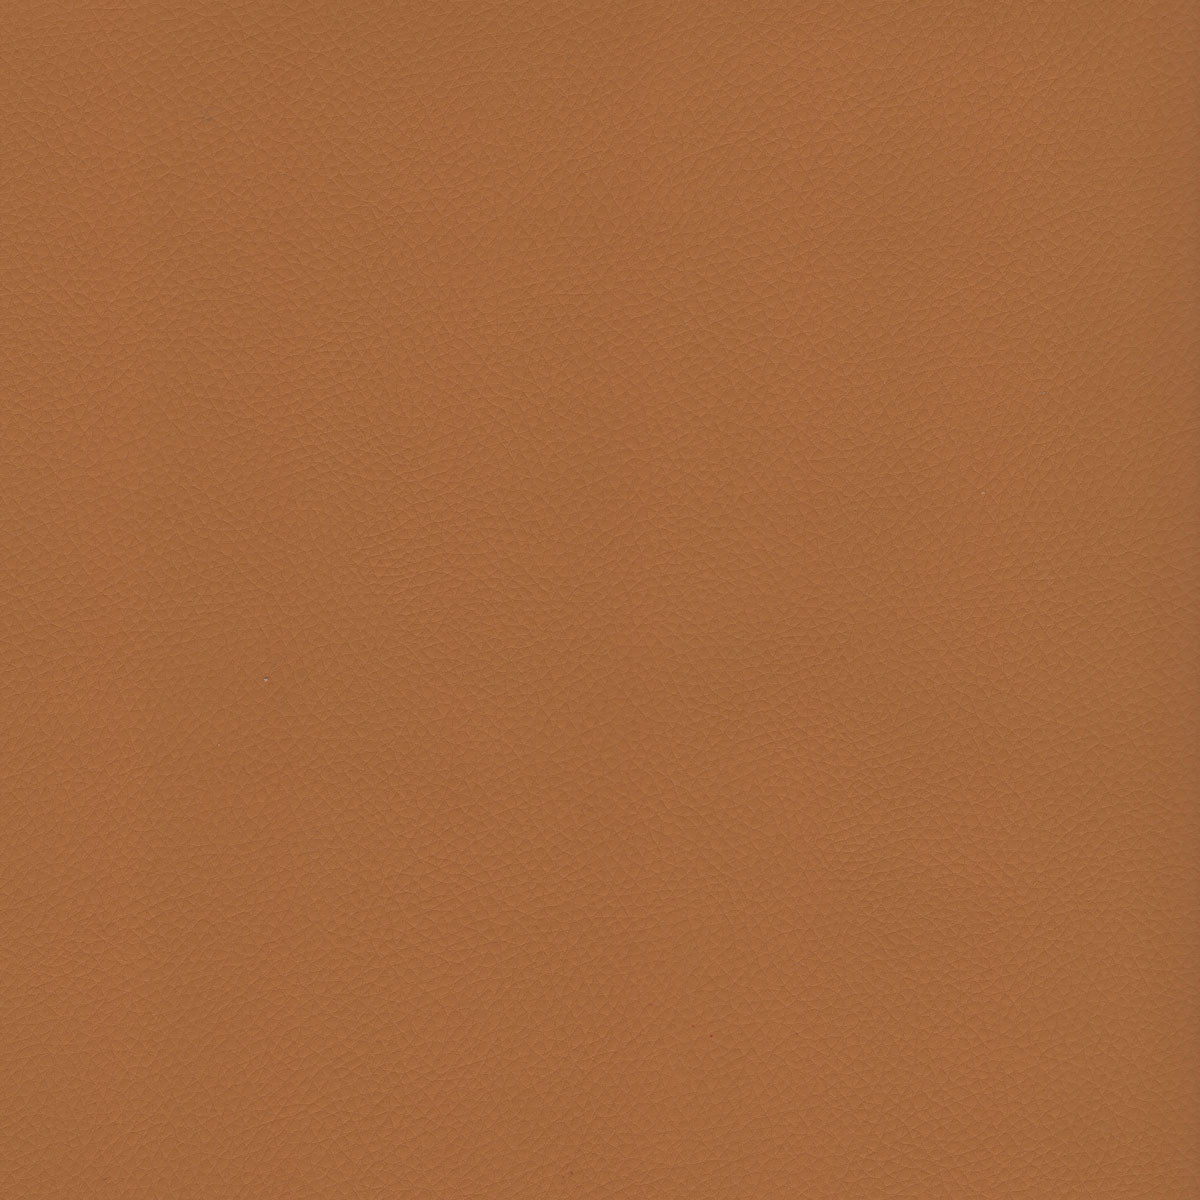 Premier-307 Apricot Leatherette by Sileather